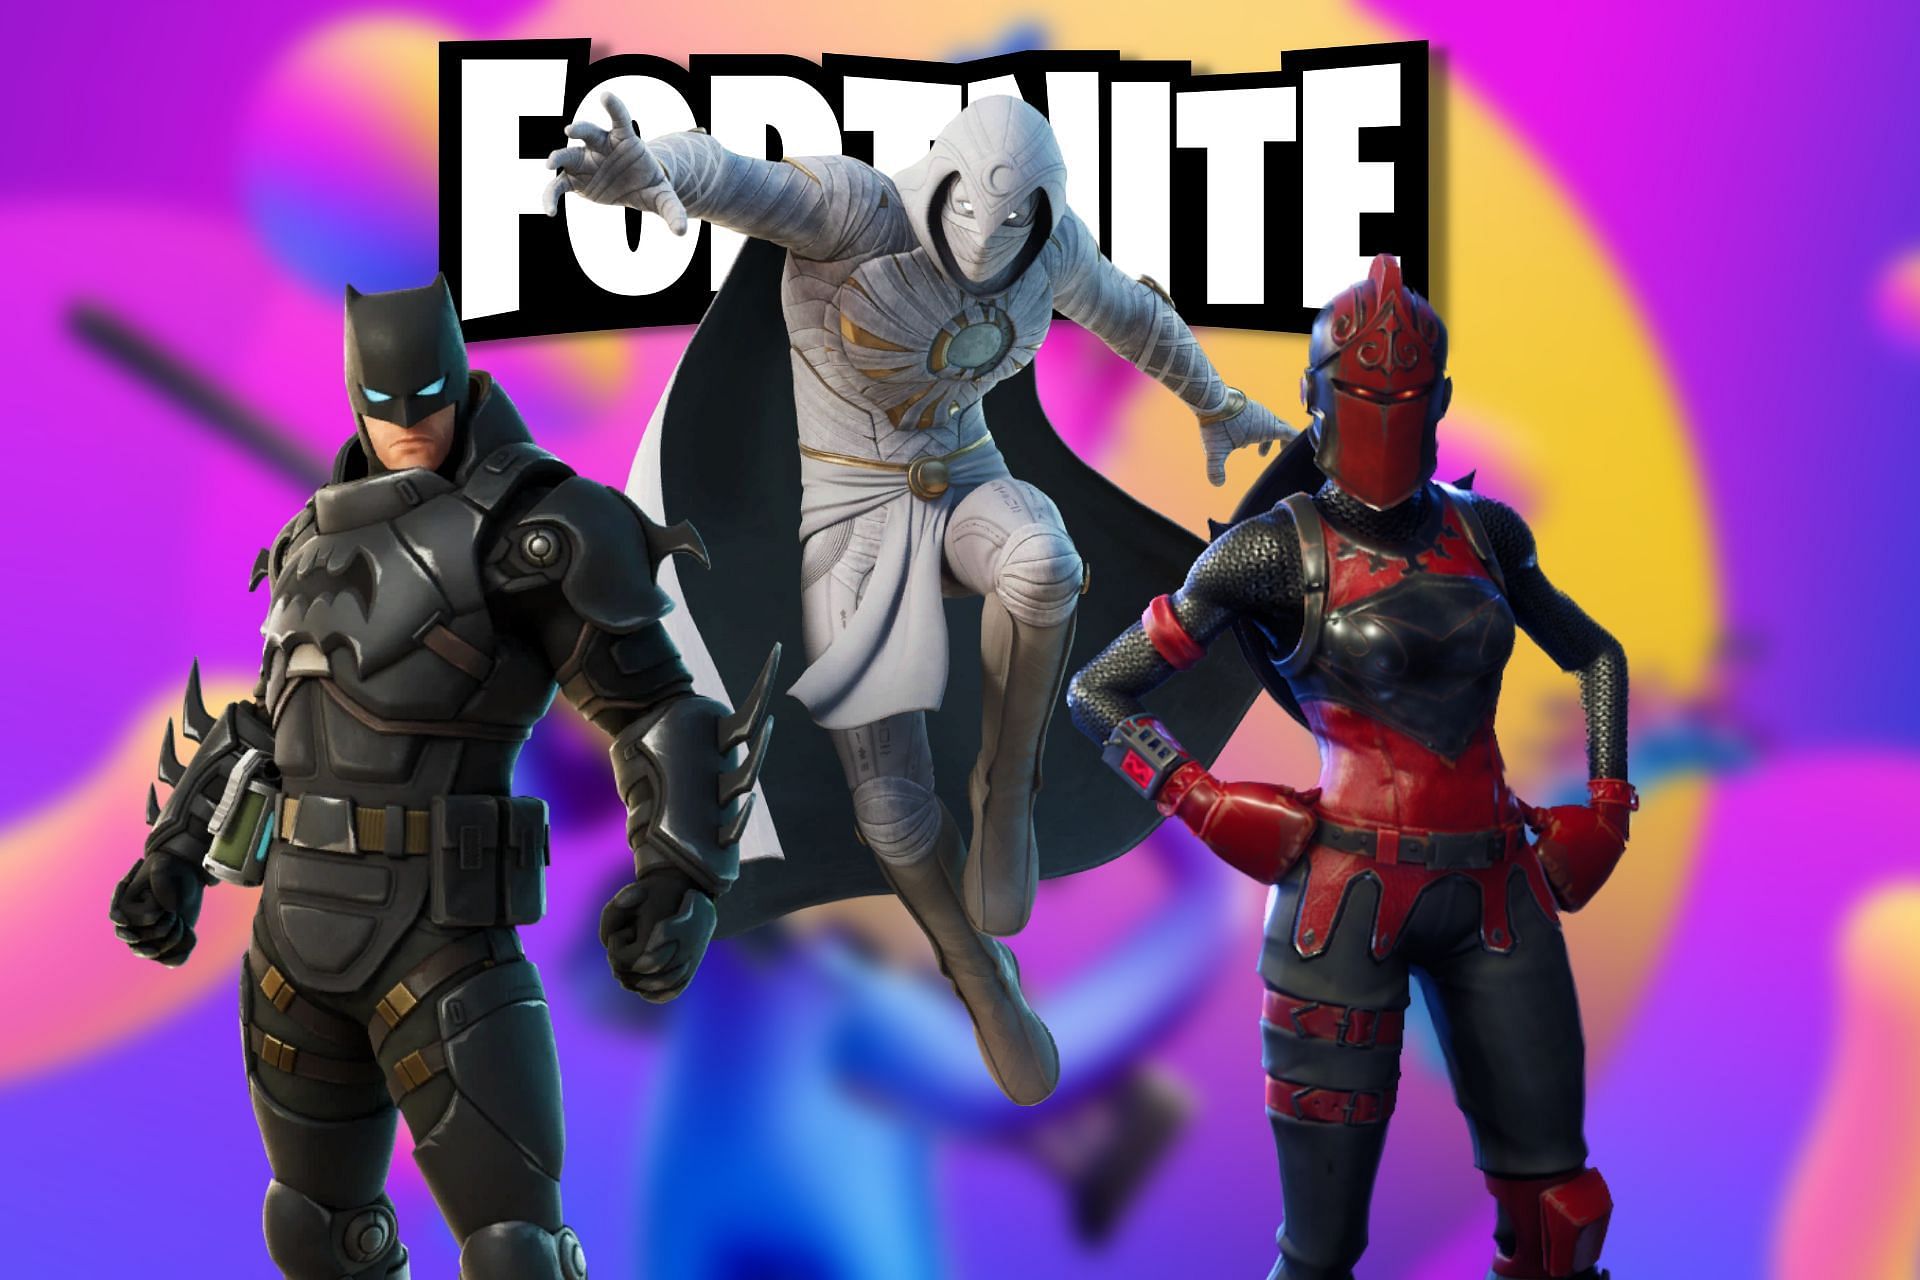 These are some of the coolest knights in Fortnite (Image via Sportskeeda)